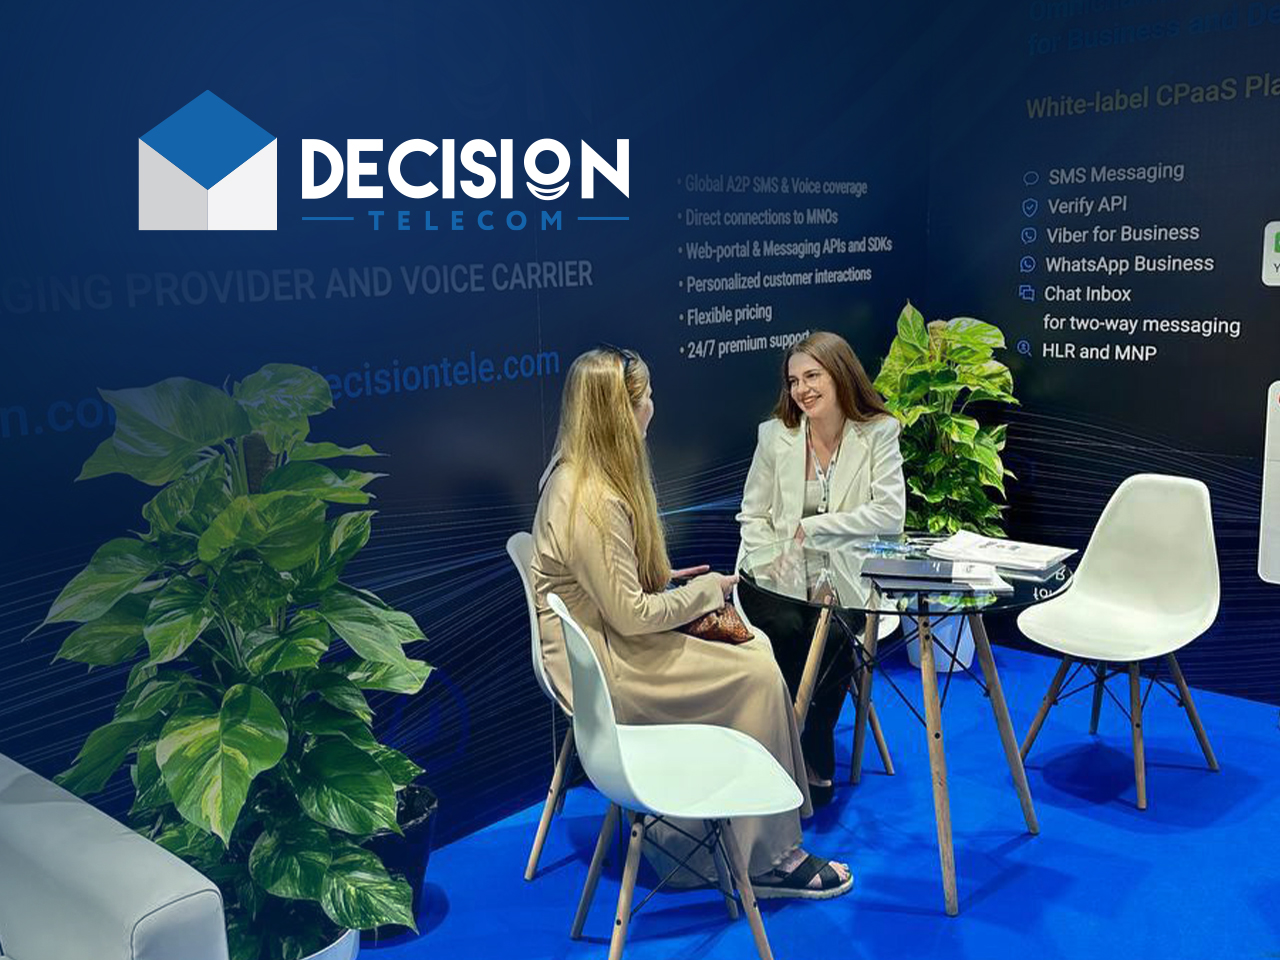 How to effectively present your company at an exhibition using a stand